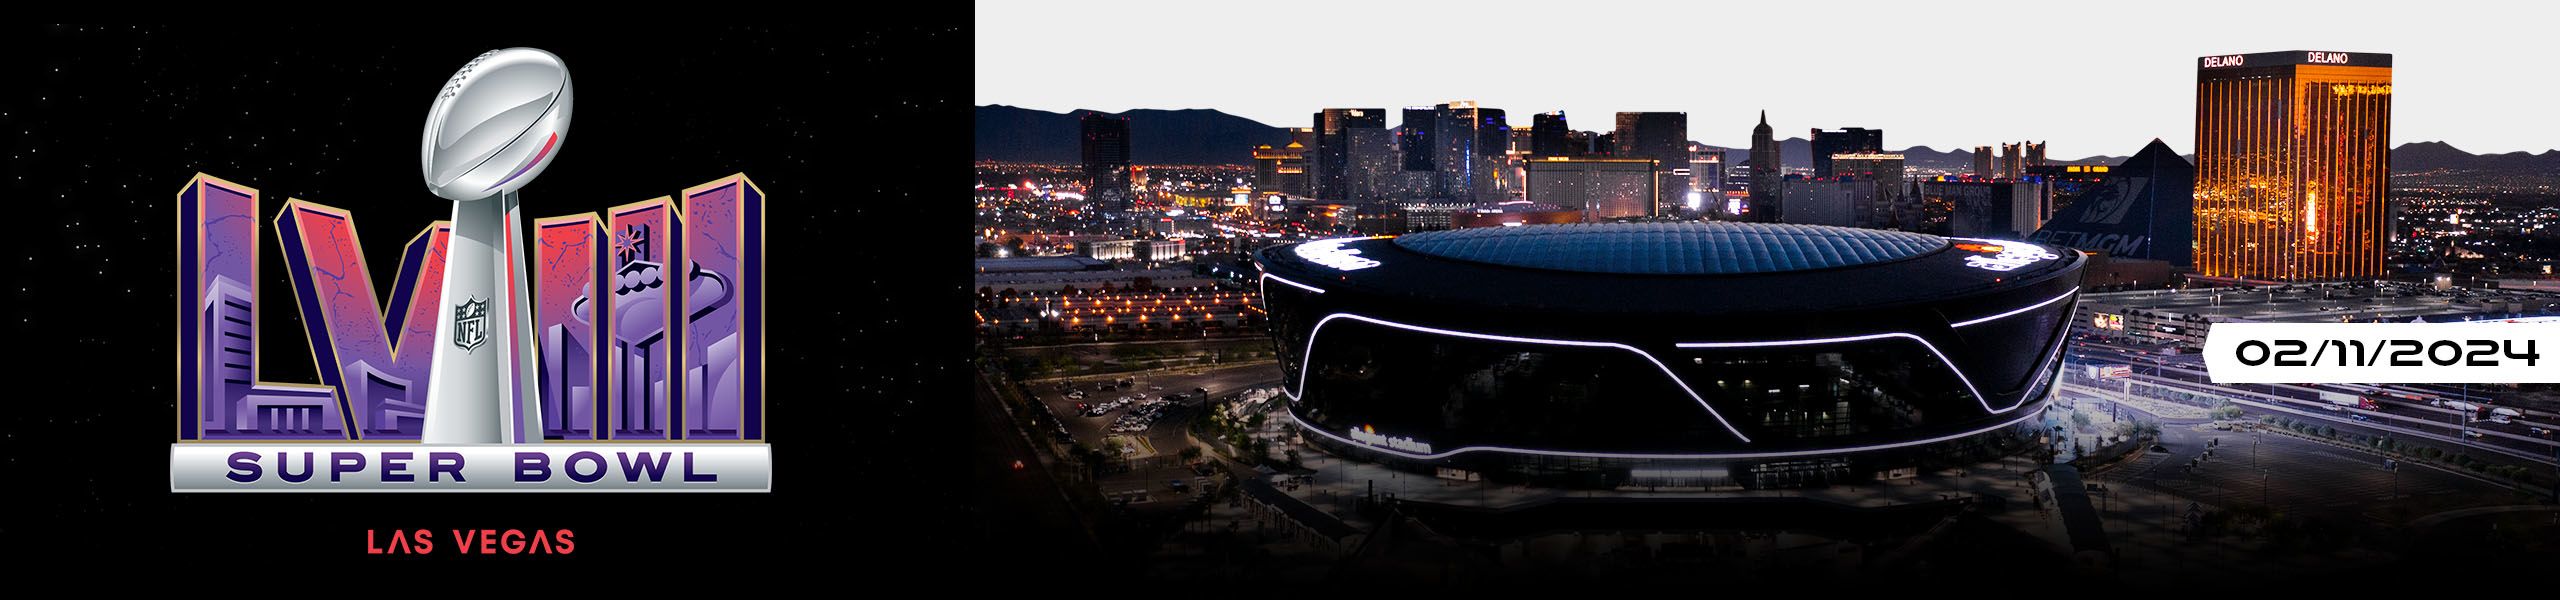 Las Vegas to host Super Bowl LVIII for the first time in 2024